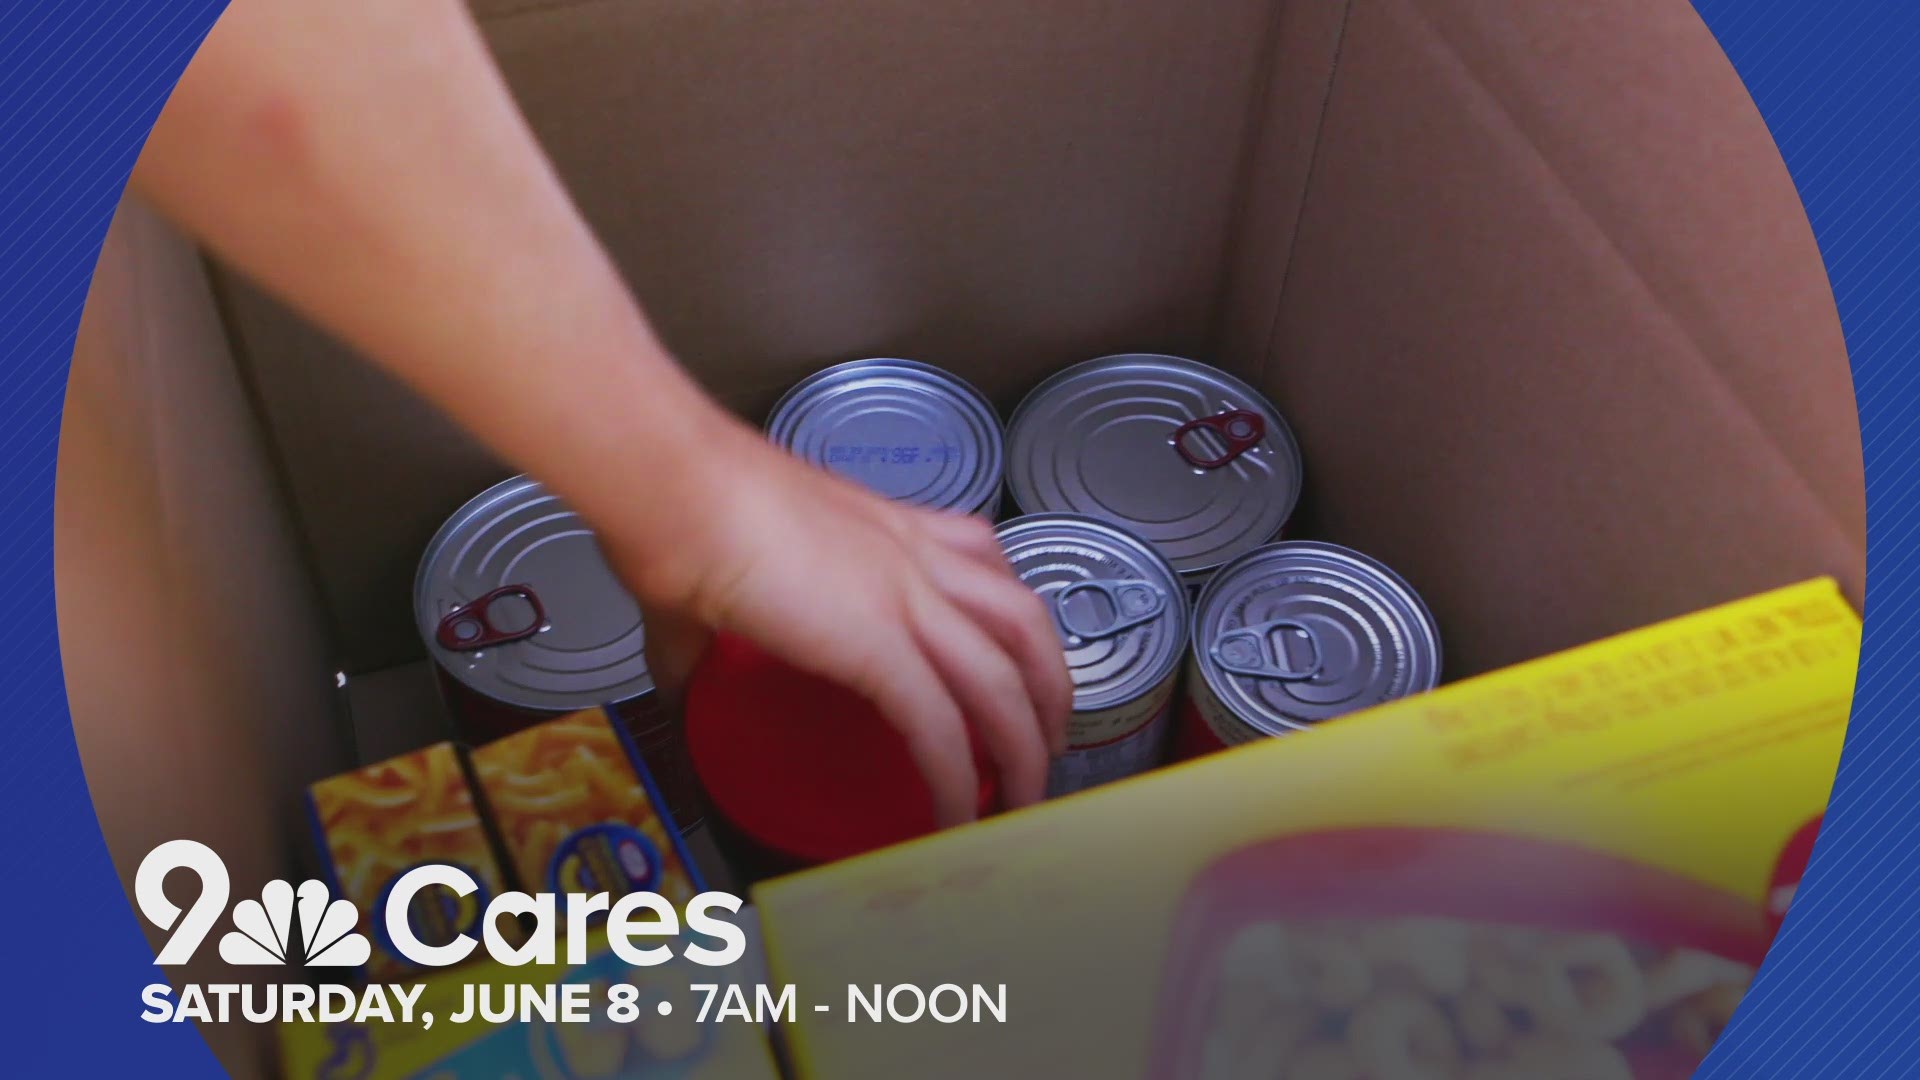 The 2019 9Cares Colorado Shares summer food drive will be held on Saturday, June 8 from 7 a.m. to 12 p.m. at the 9NEWS Studios at 500 East Speer Boulevard in Denver.